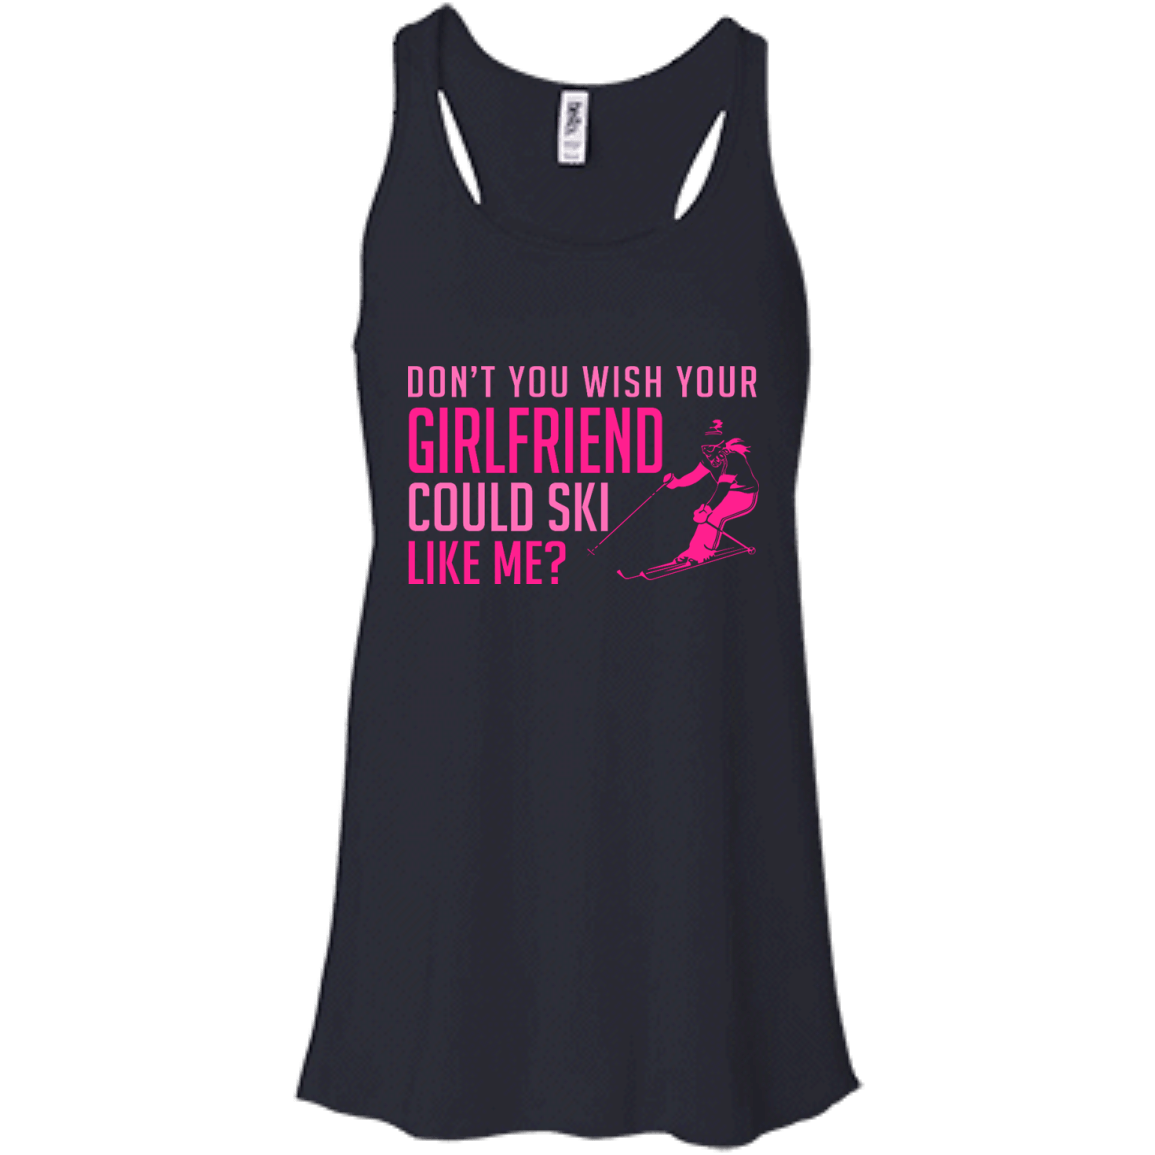 Don't You Wish Your Girlfriend Could Ski Like Me? Tank Tops - Powderaddicts